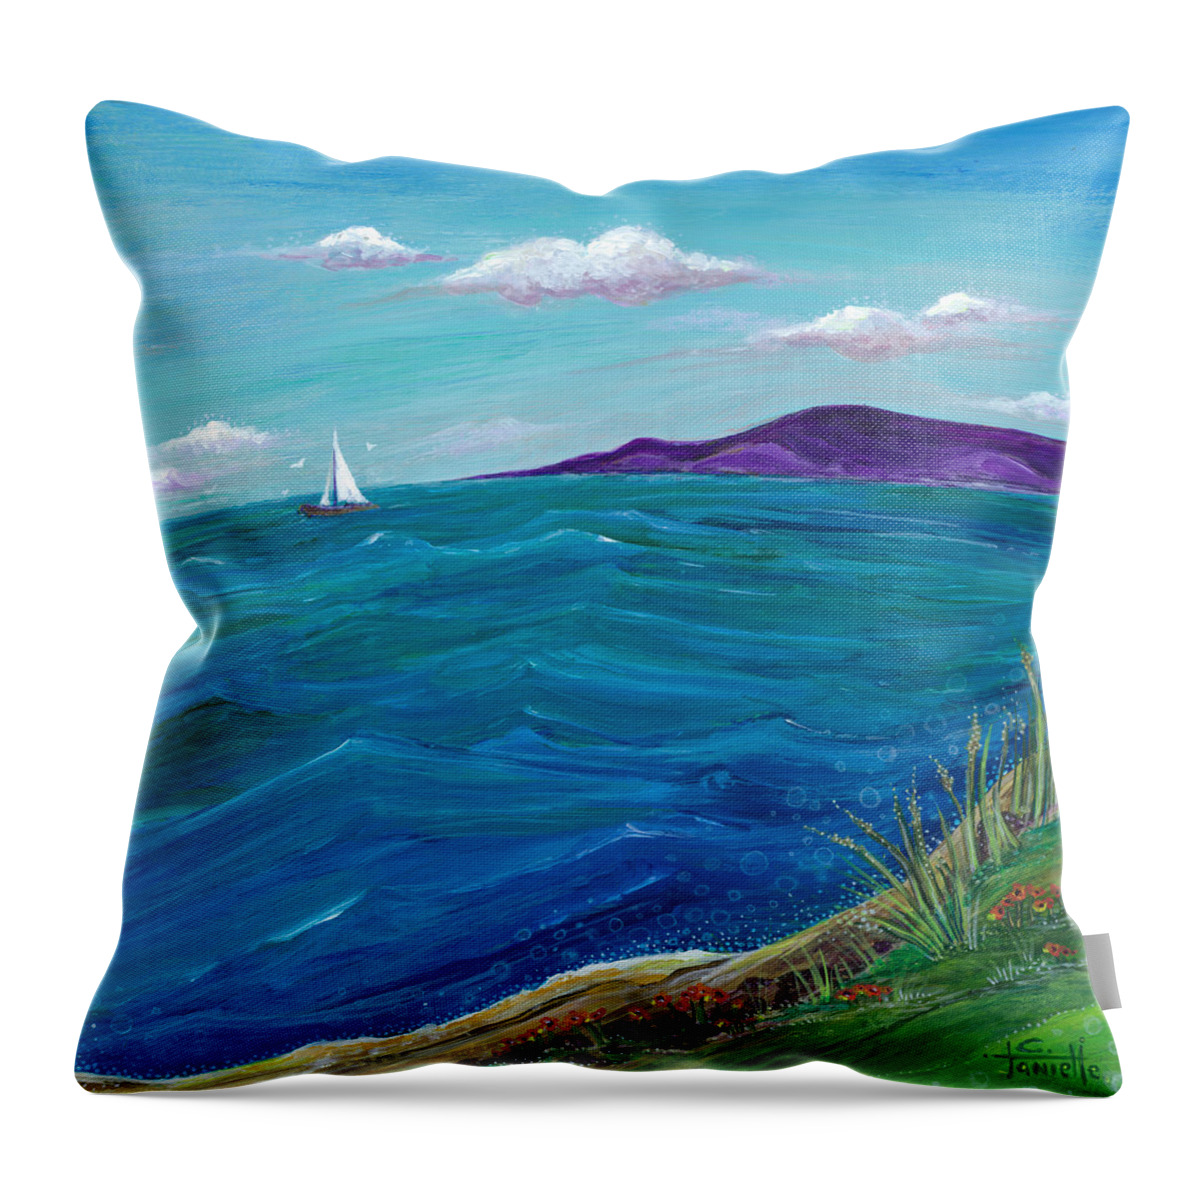 Seascape Painting Throw Pillow featuring the painting Wanderlust by Tanielle Childers